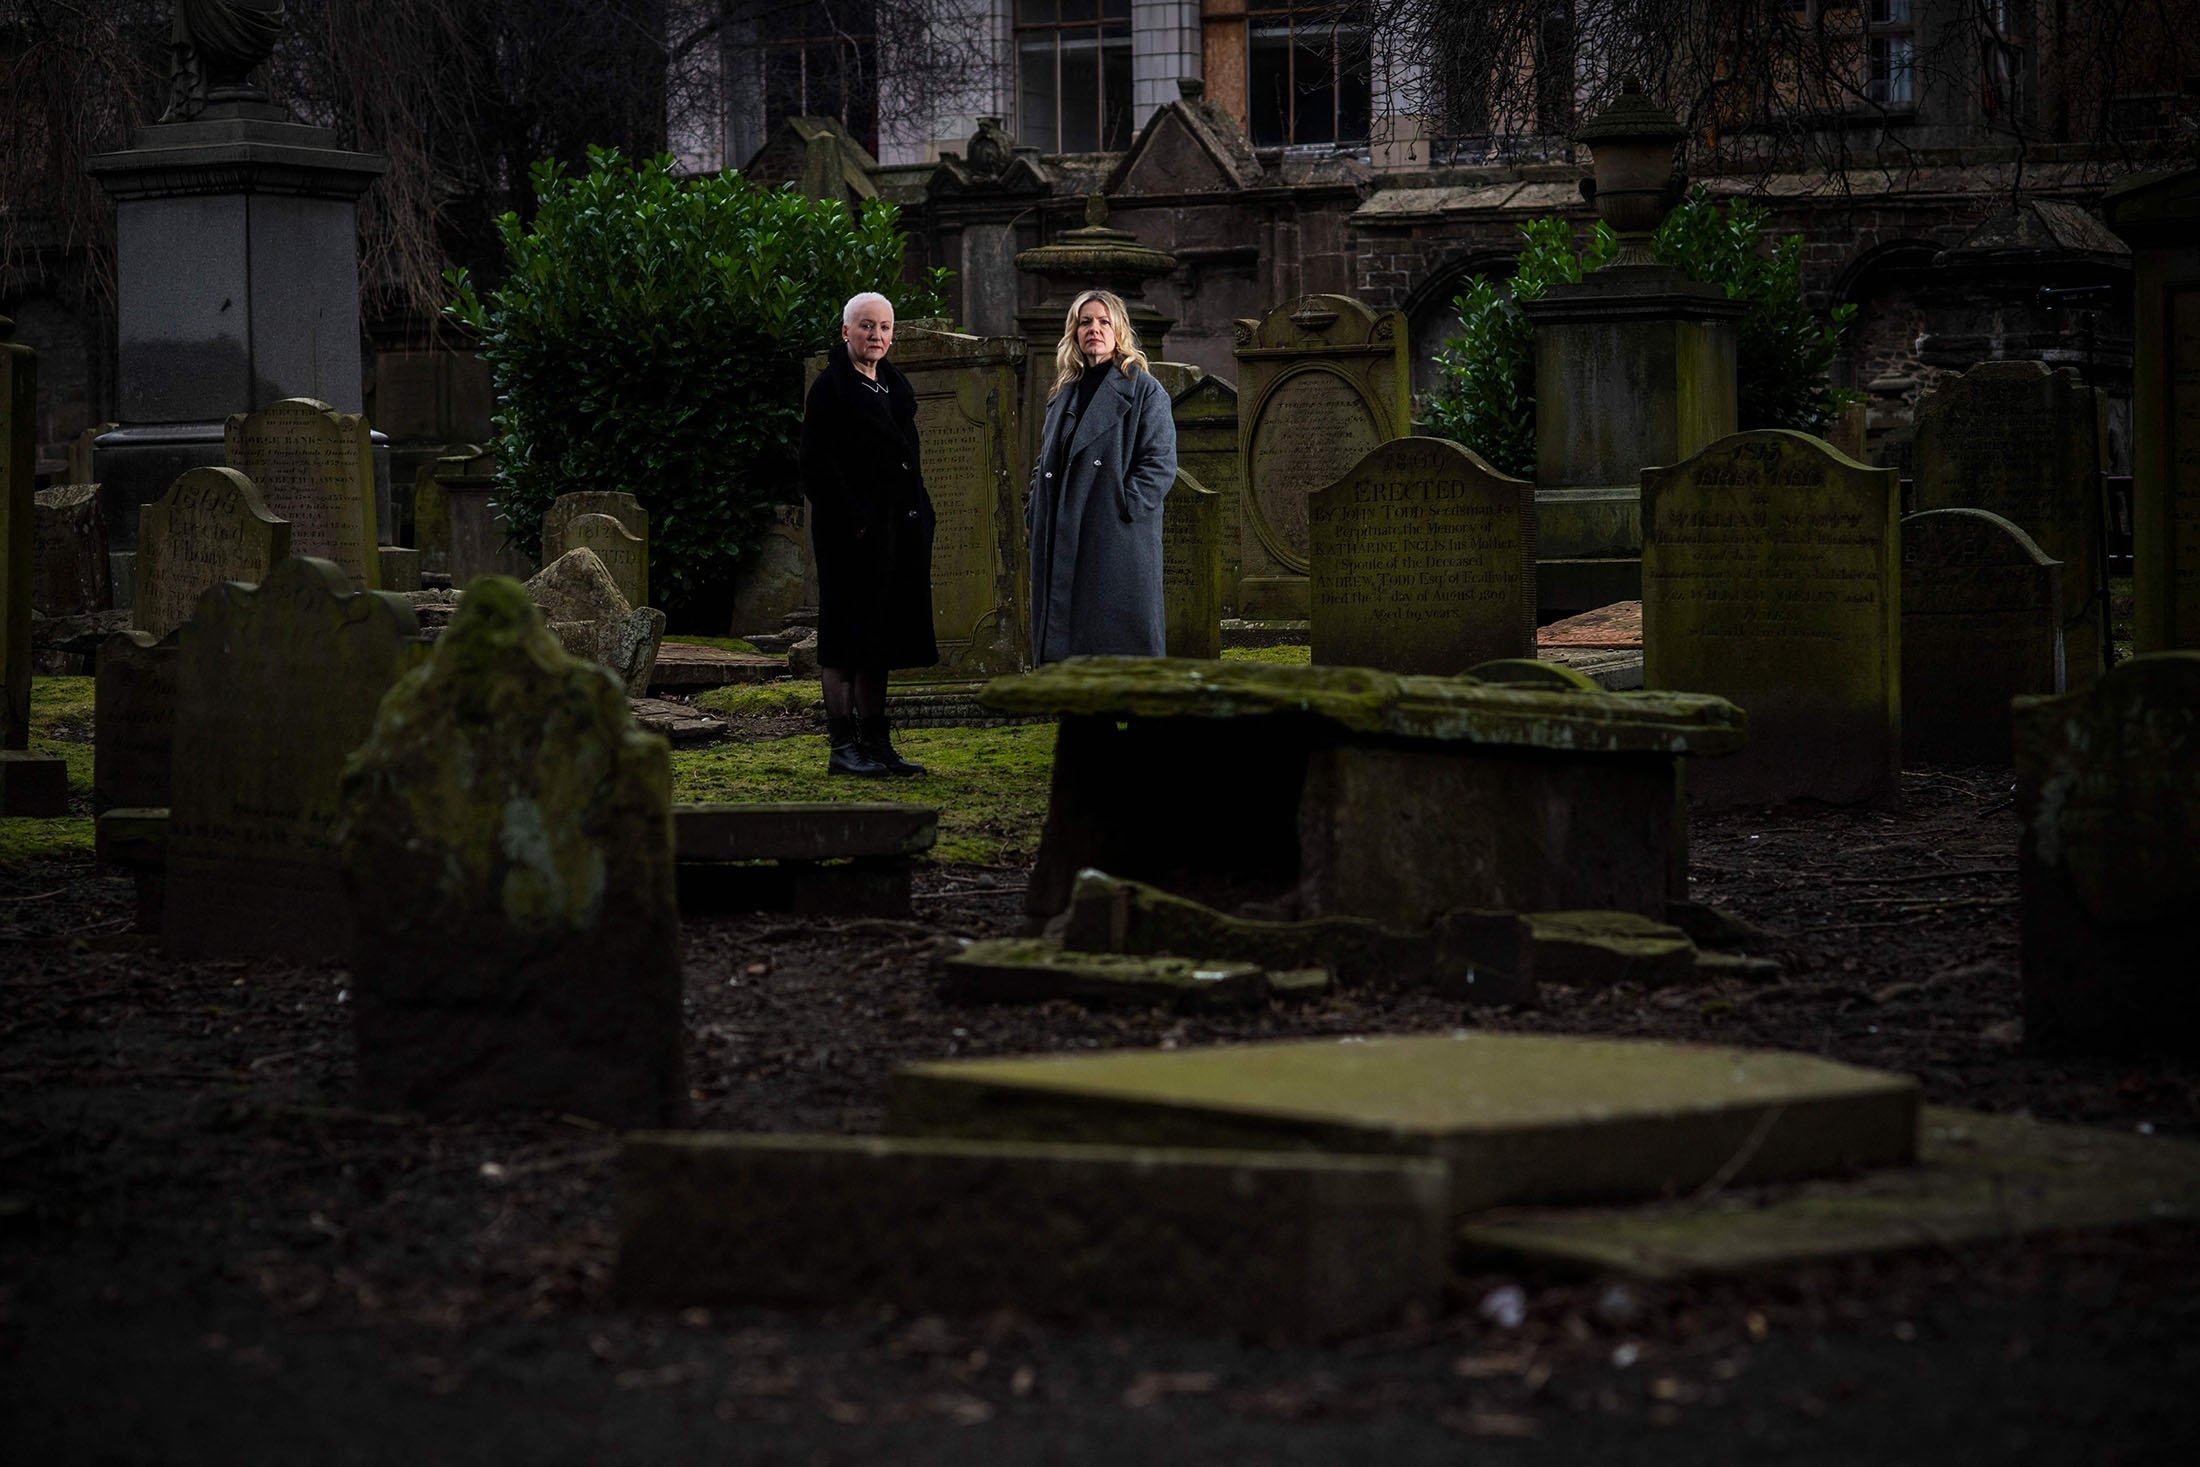 Founder of the association "Witches of Scotland" Claire Mitchell and member Zoe Venditozzi pose for pictures in the Howff Cemetery in Dundee, Scotland, Jan. 30, 2022. (AFP Photo)